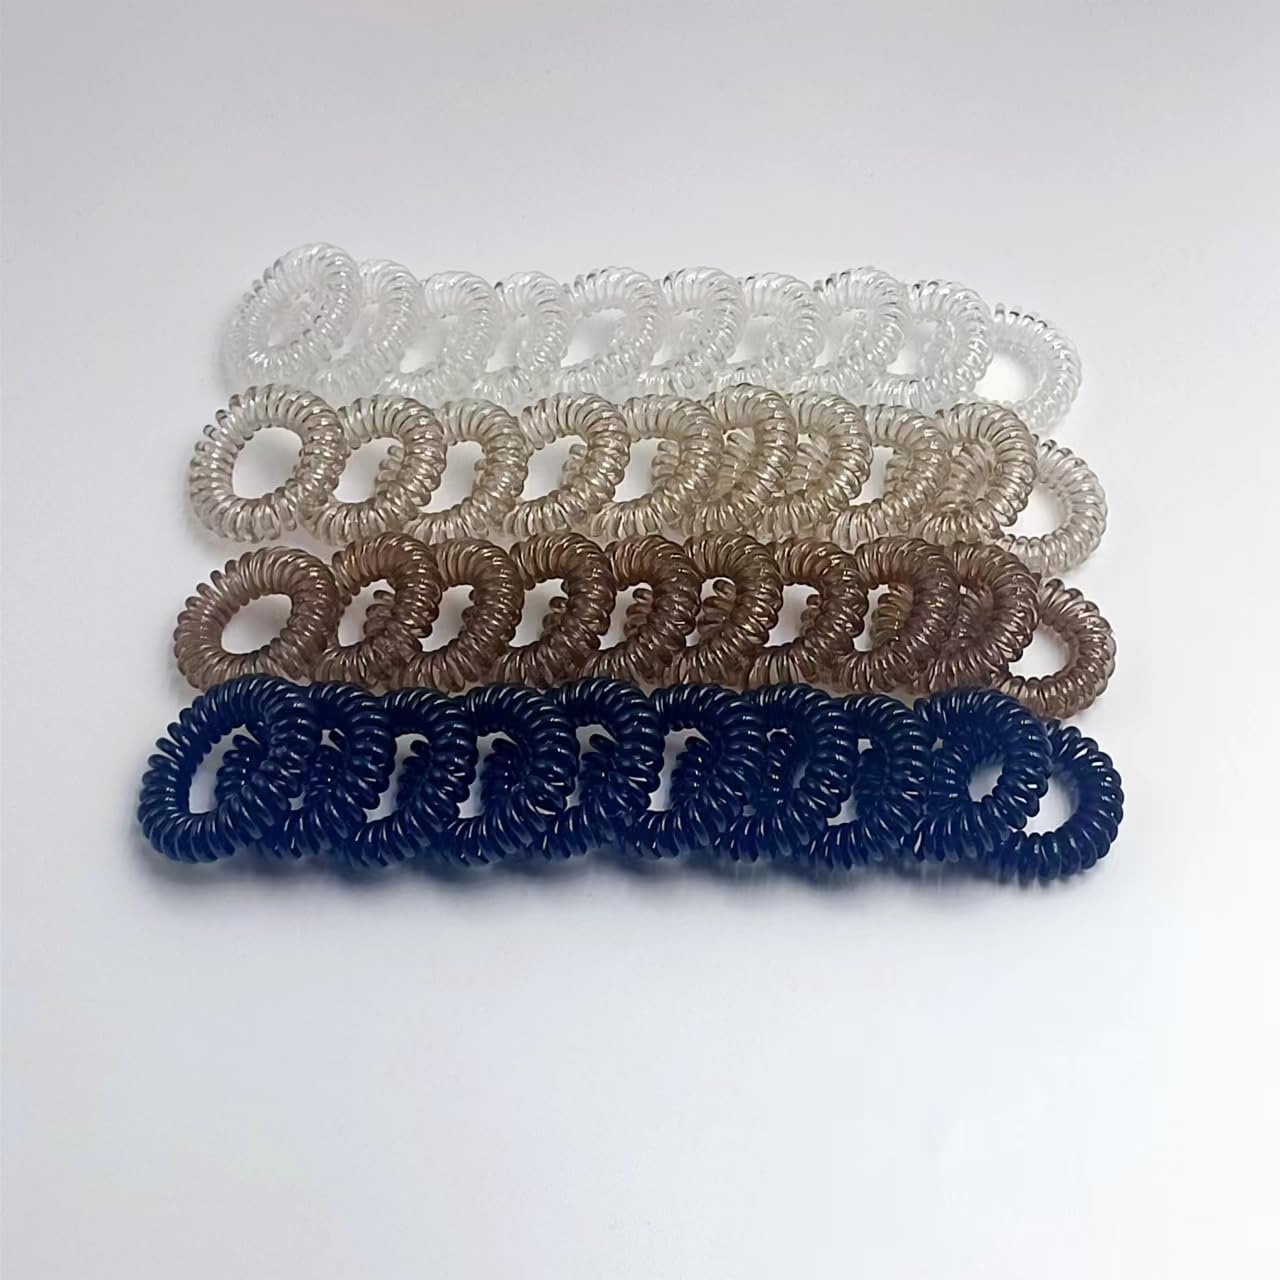 PNEIFON Spiral Hair Ties 40 pcs No Crease Elastic Ponytail Holders Hair Ring Leopard Phone Cord Traceless Hair Rubber Bands Suitable for All Hair Types (style4)